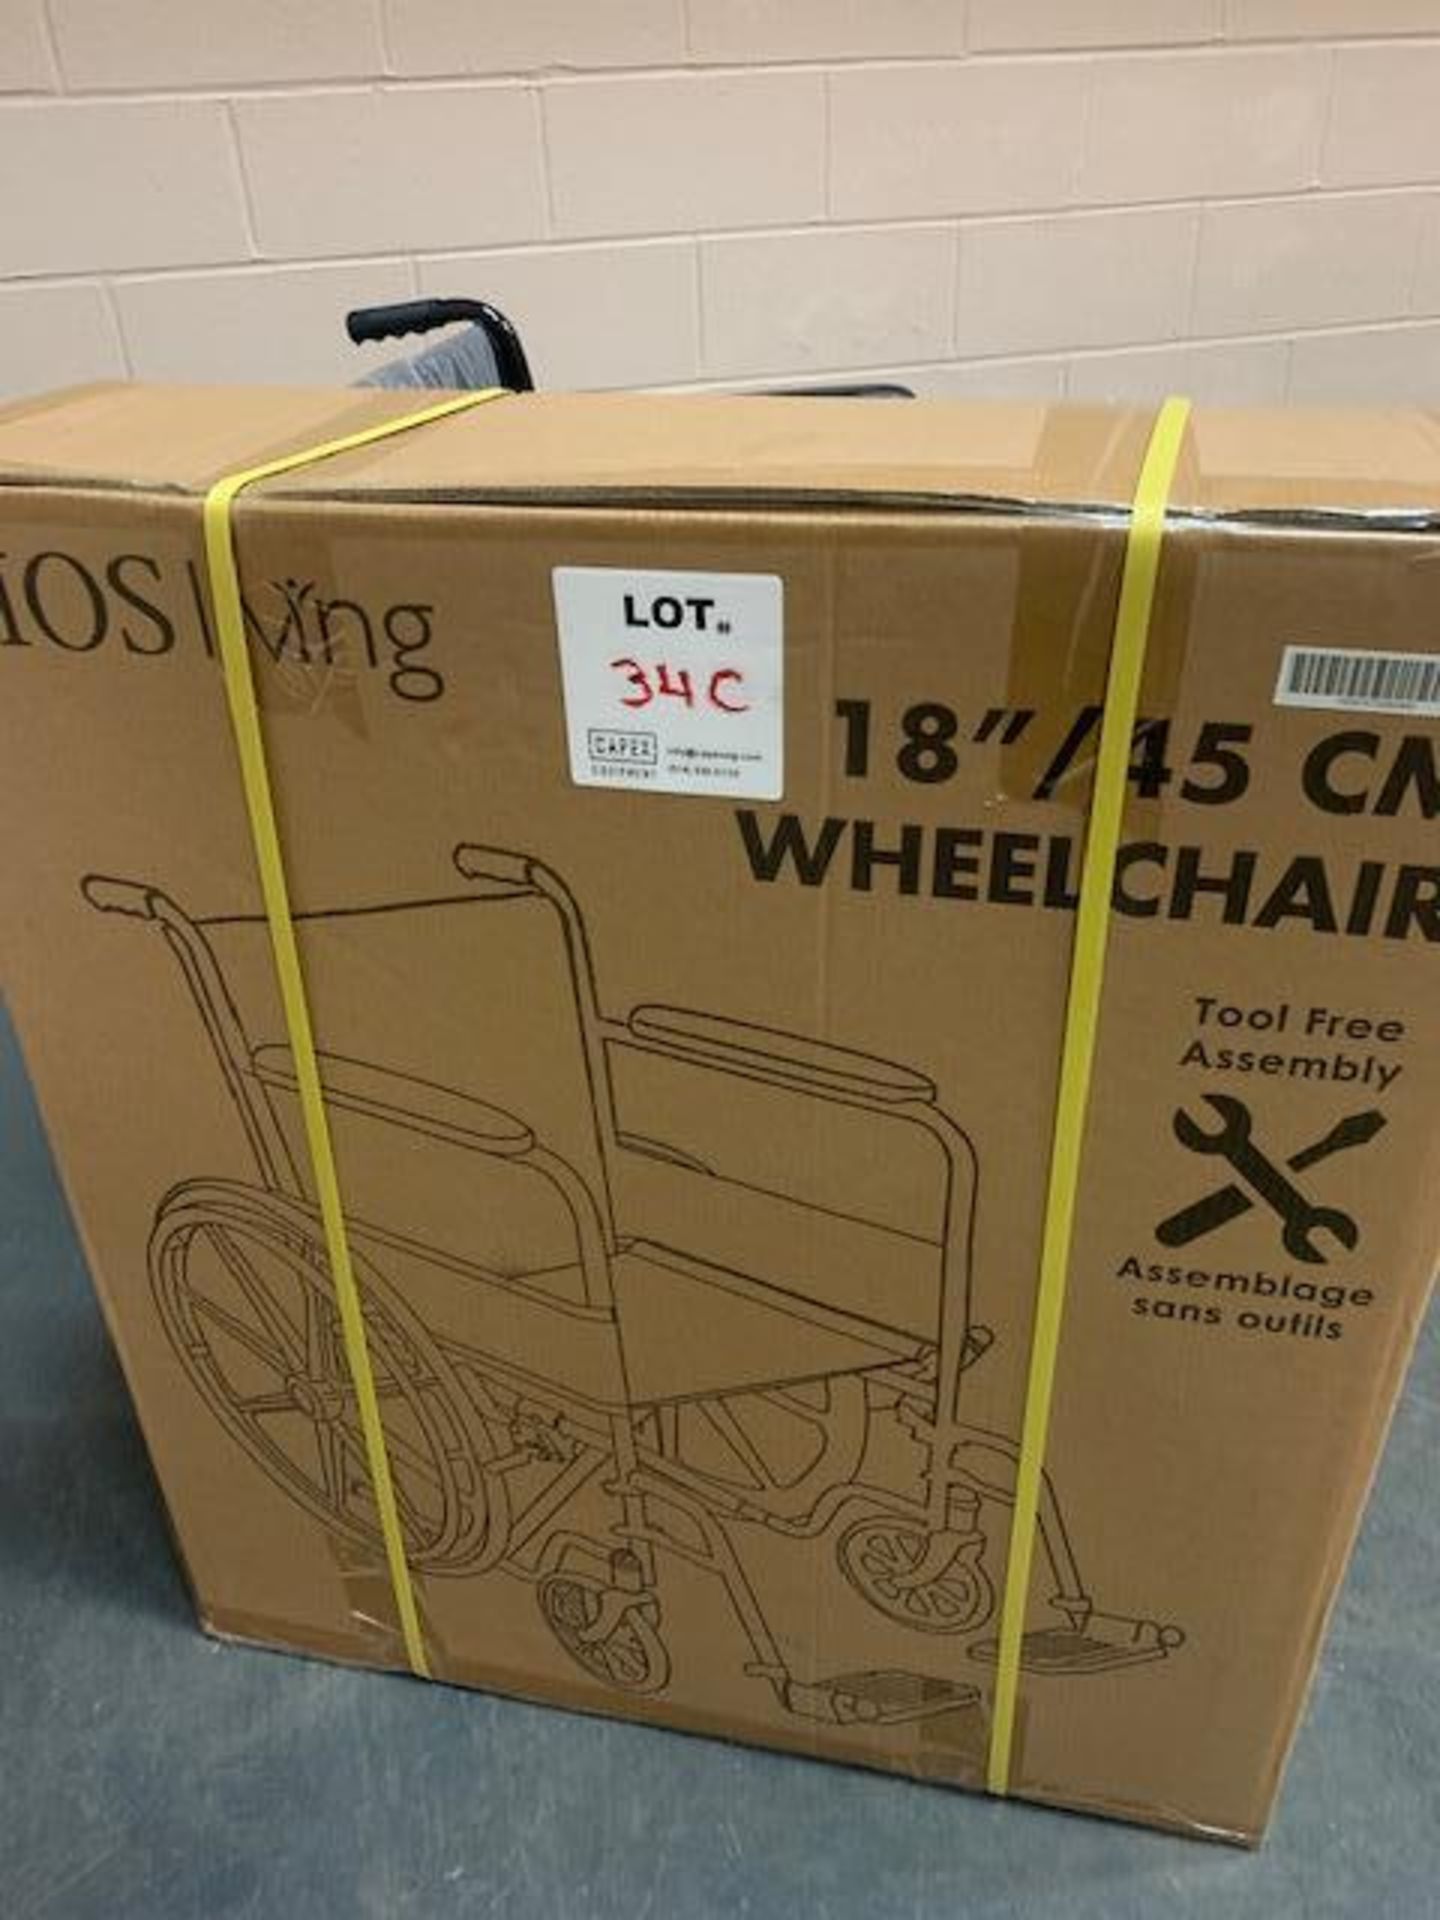 New In Box BIOS Living 18 inch / 45 cm Wheelchair Tool Free Assembly - Image 6 of 6